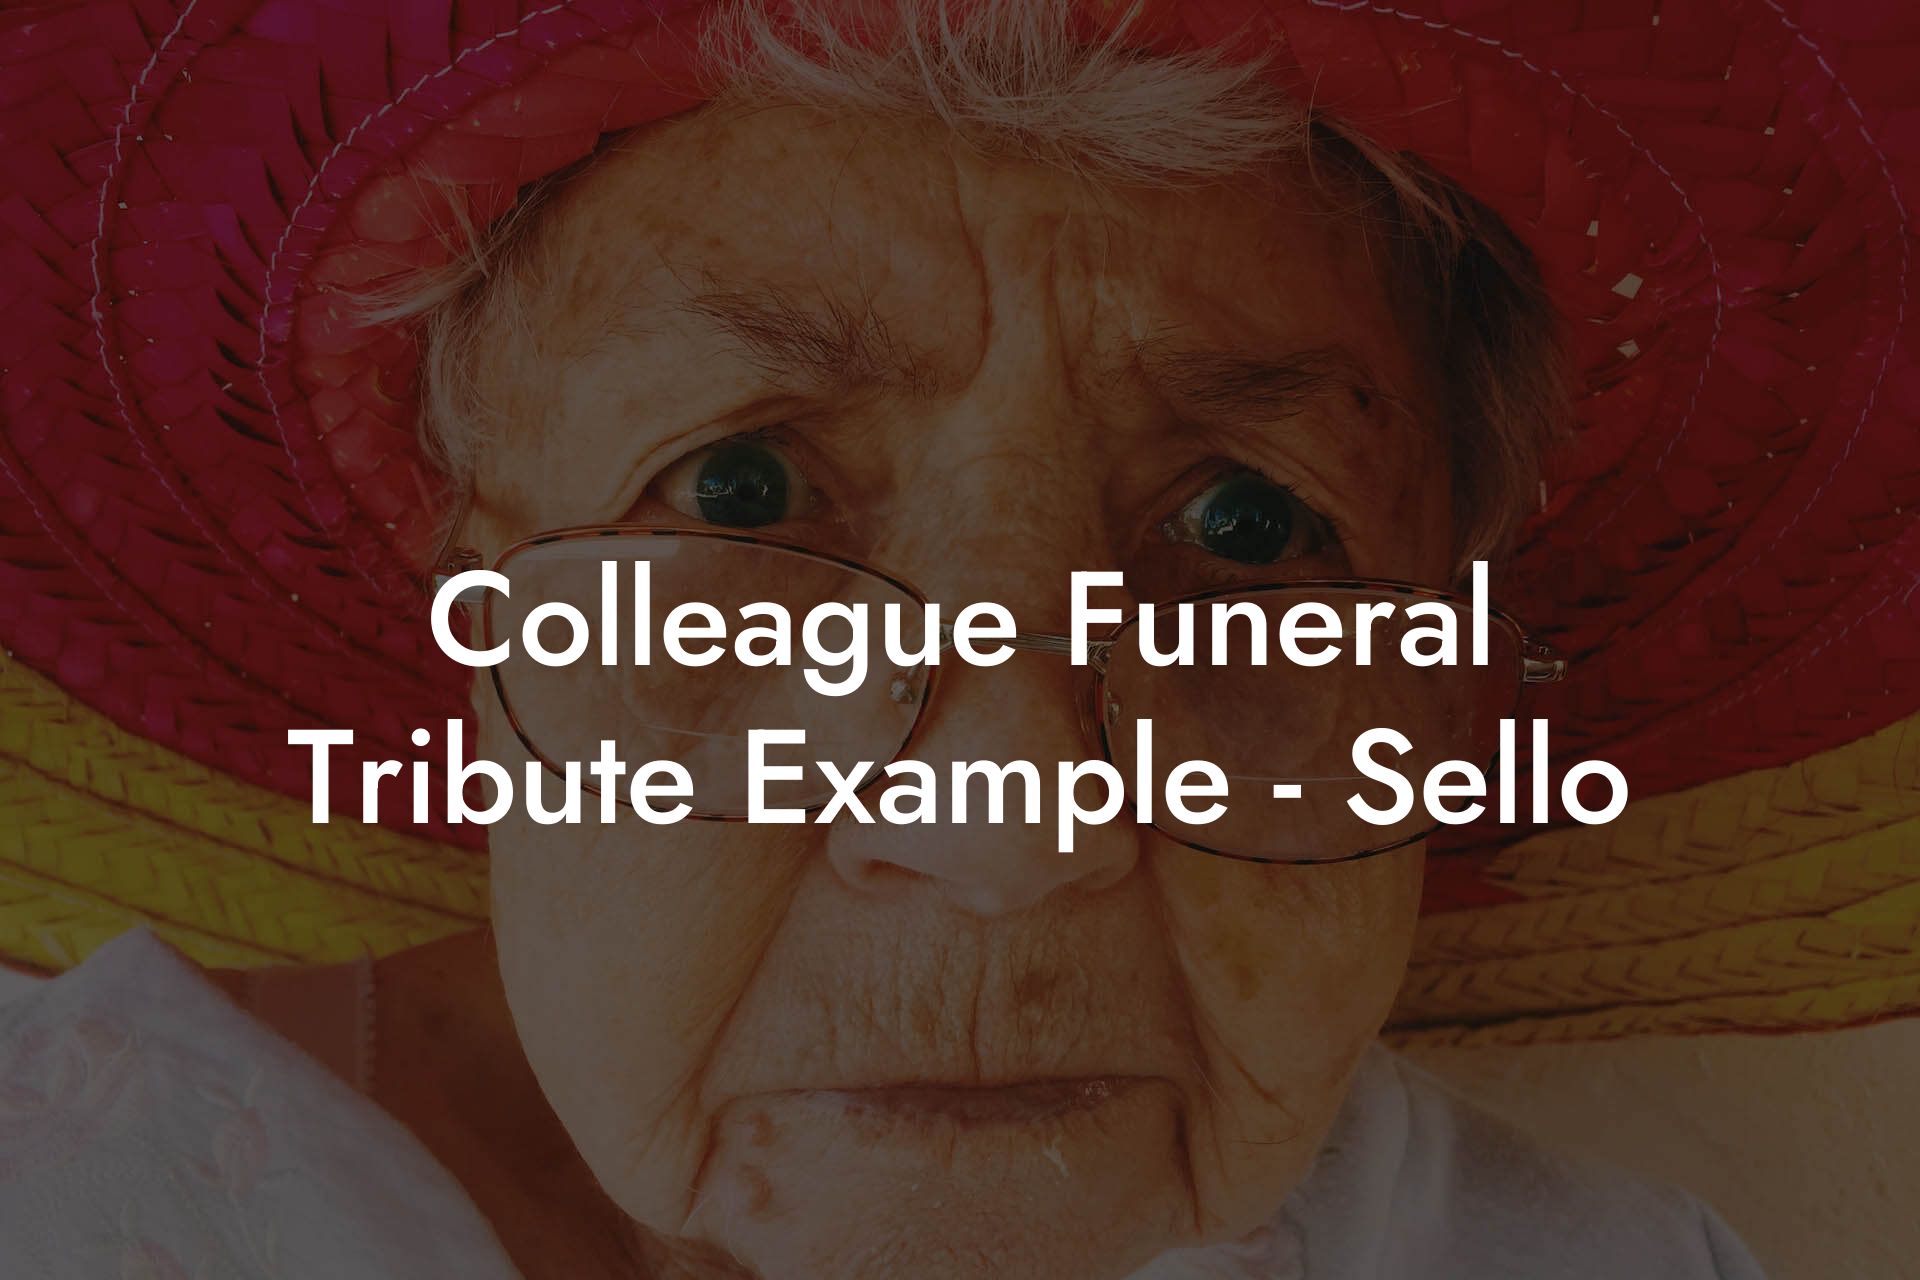 Colleague Funeral Tribute Example - Sello